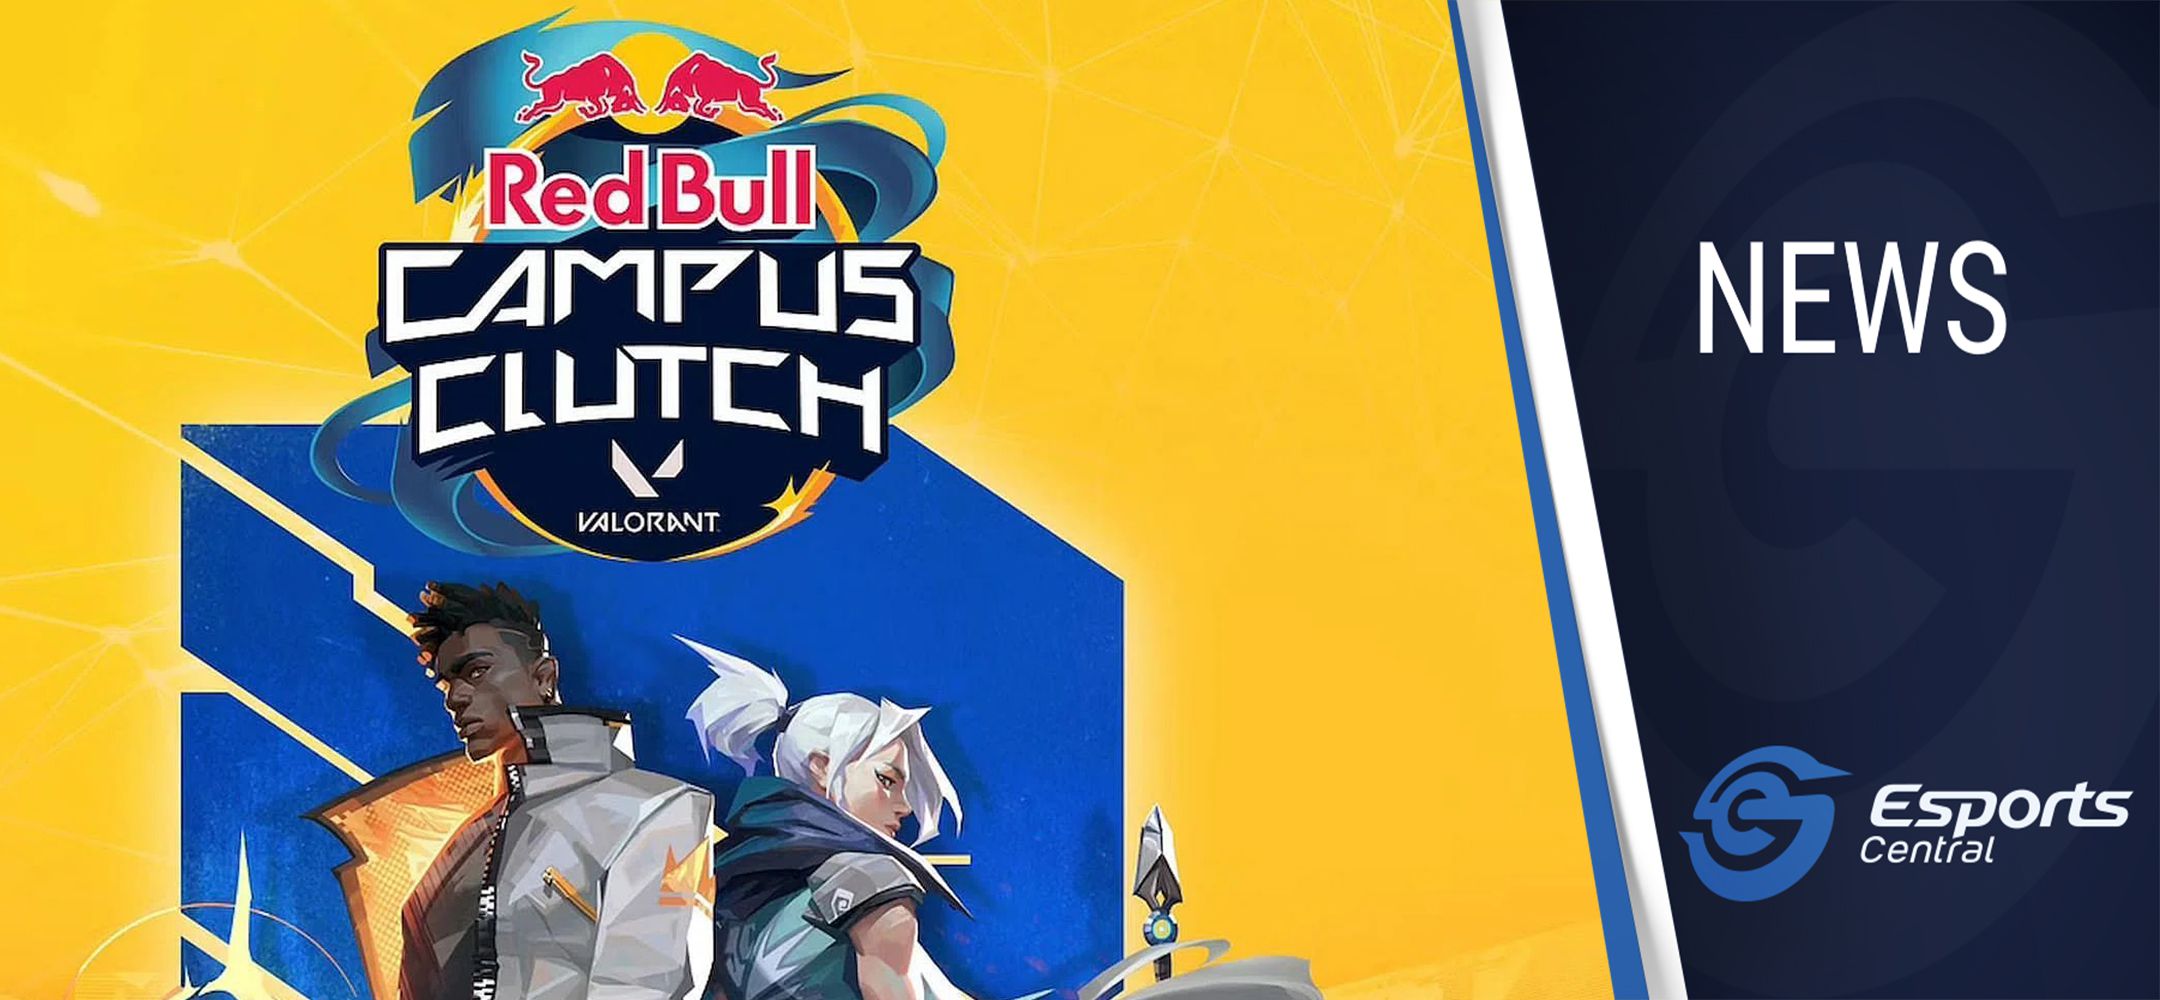 Red Bull Campus Clutch World Final viewer's guide - Esports Central